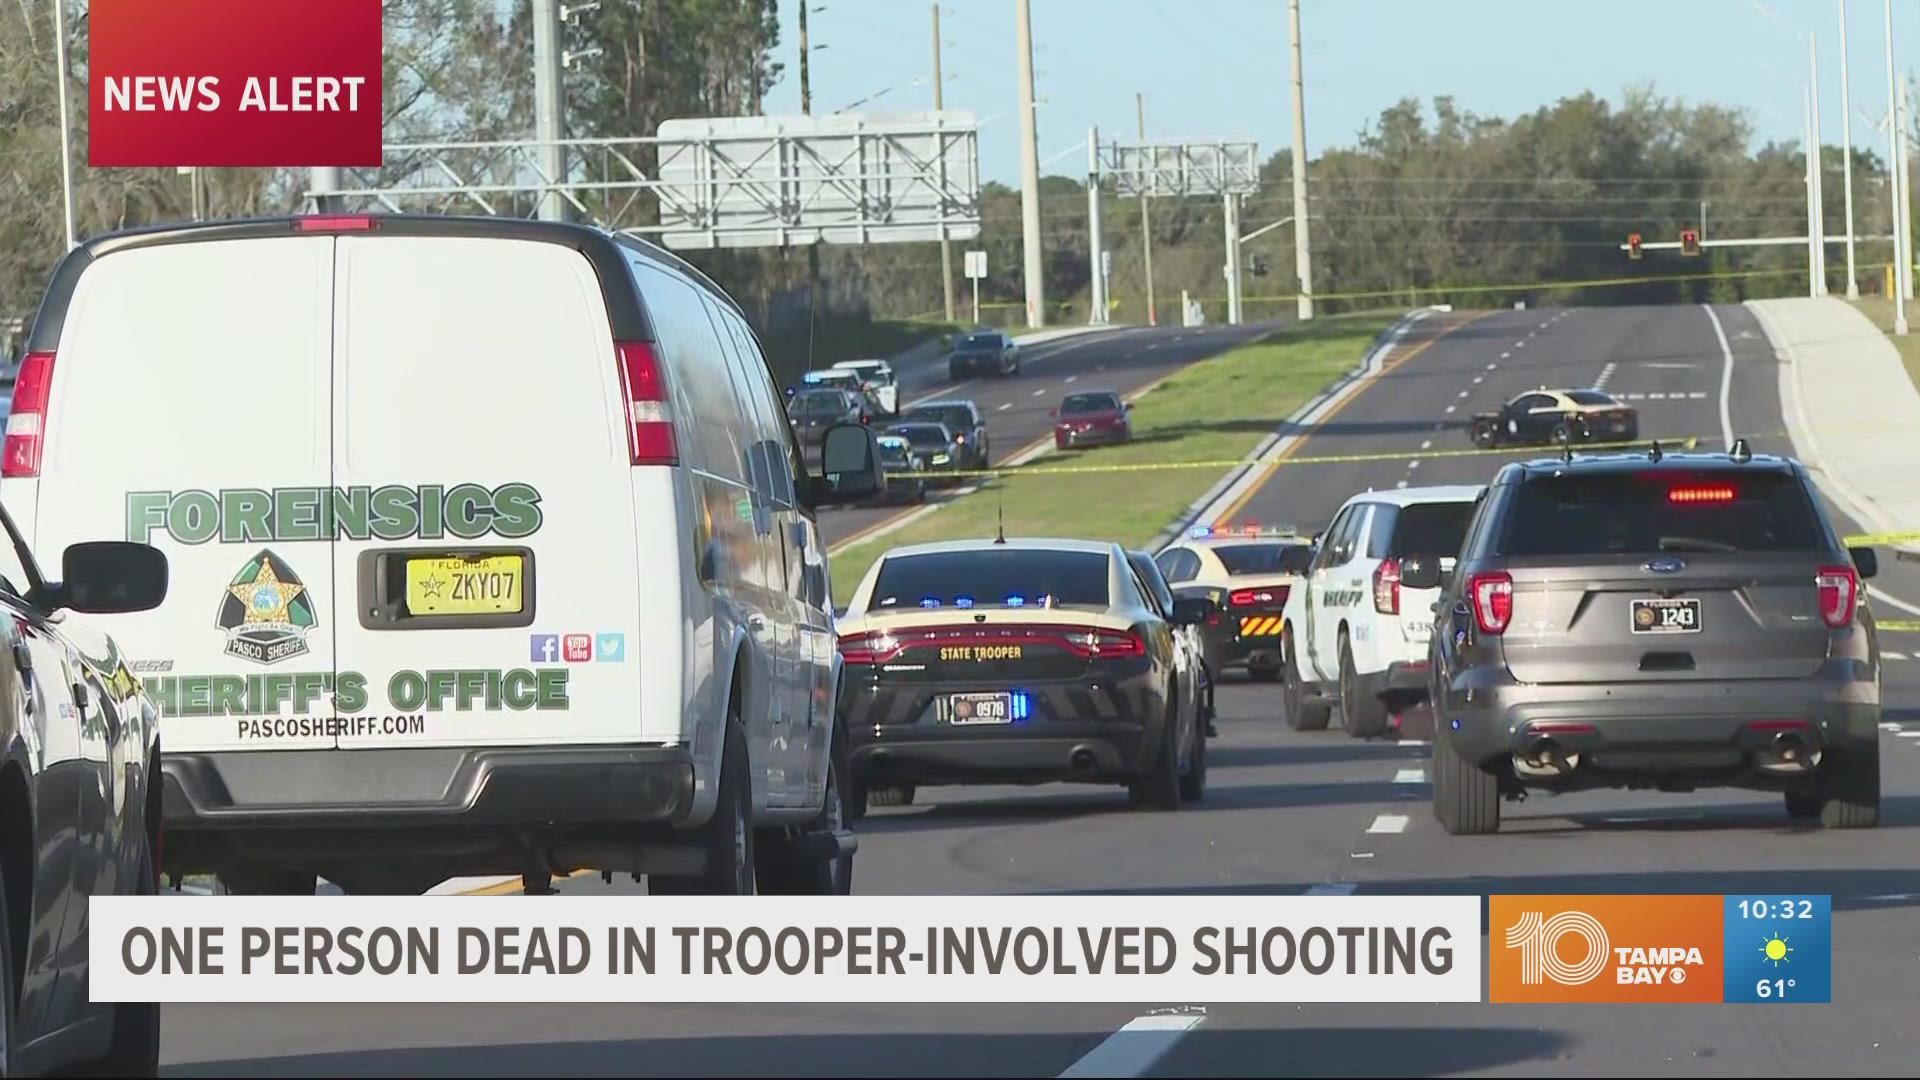 The shooting happened in the area of Overpass Road and I-75.